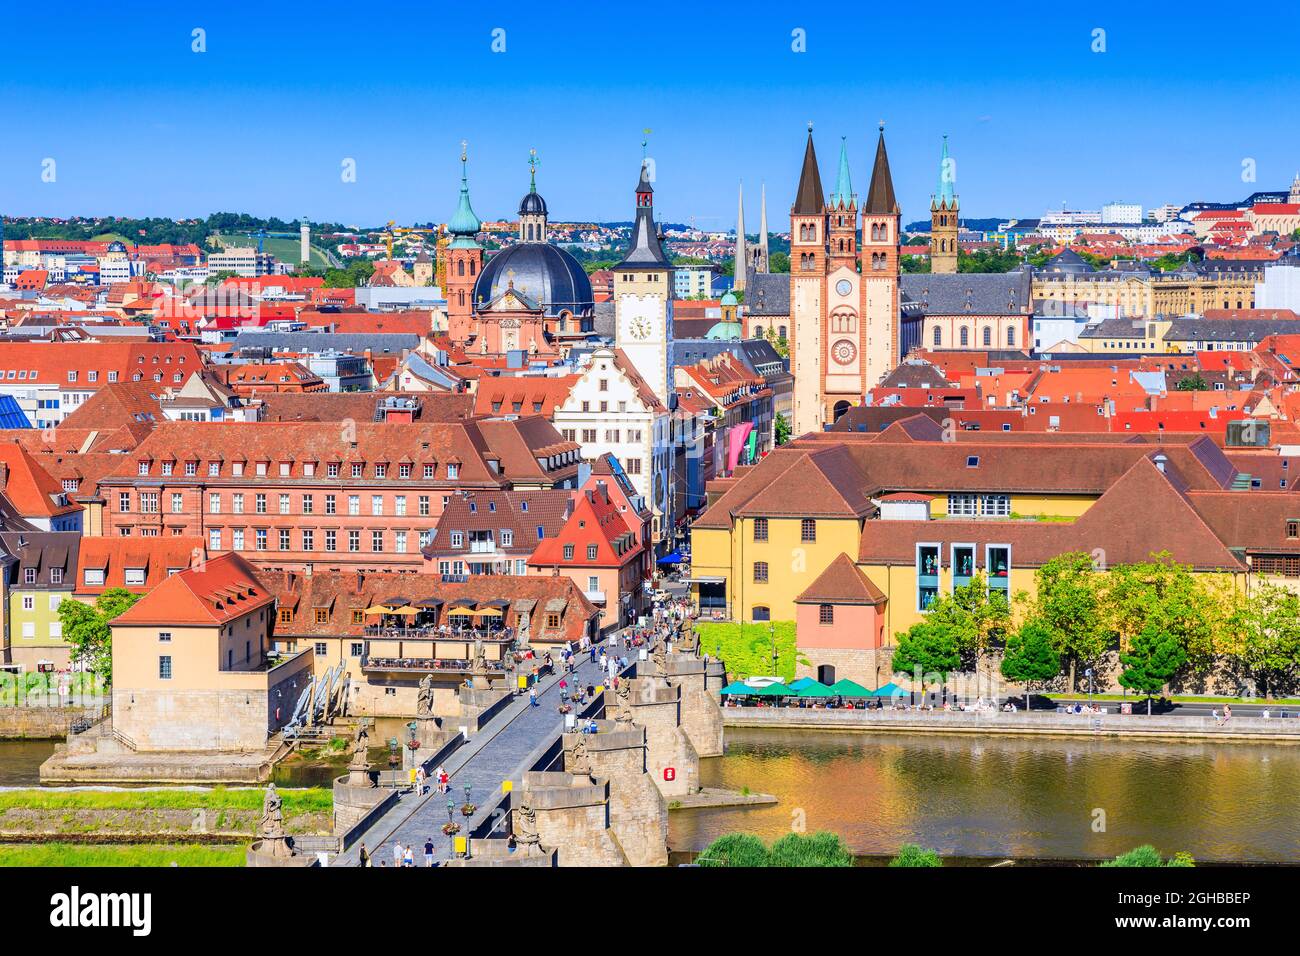 Wurzburg, Germany. Old Town skyline with the towers of St Kilian Cathedral, Neumunster church and the Chapel of St Mary. Stock Photo